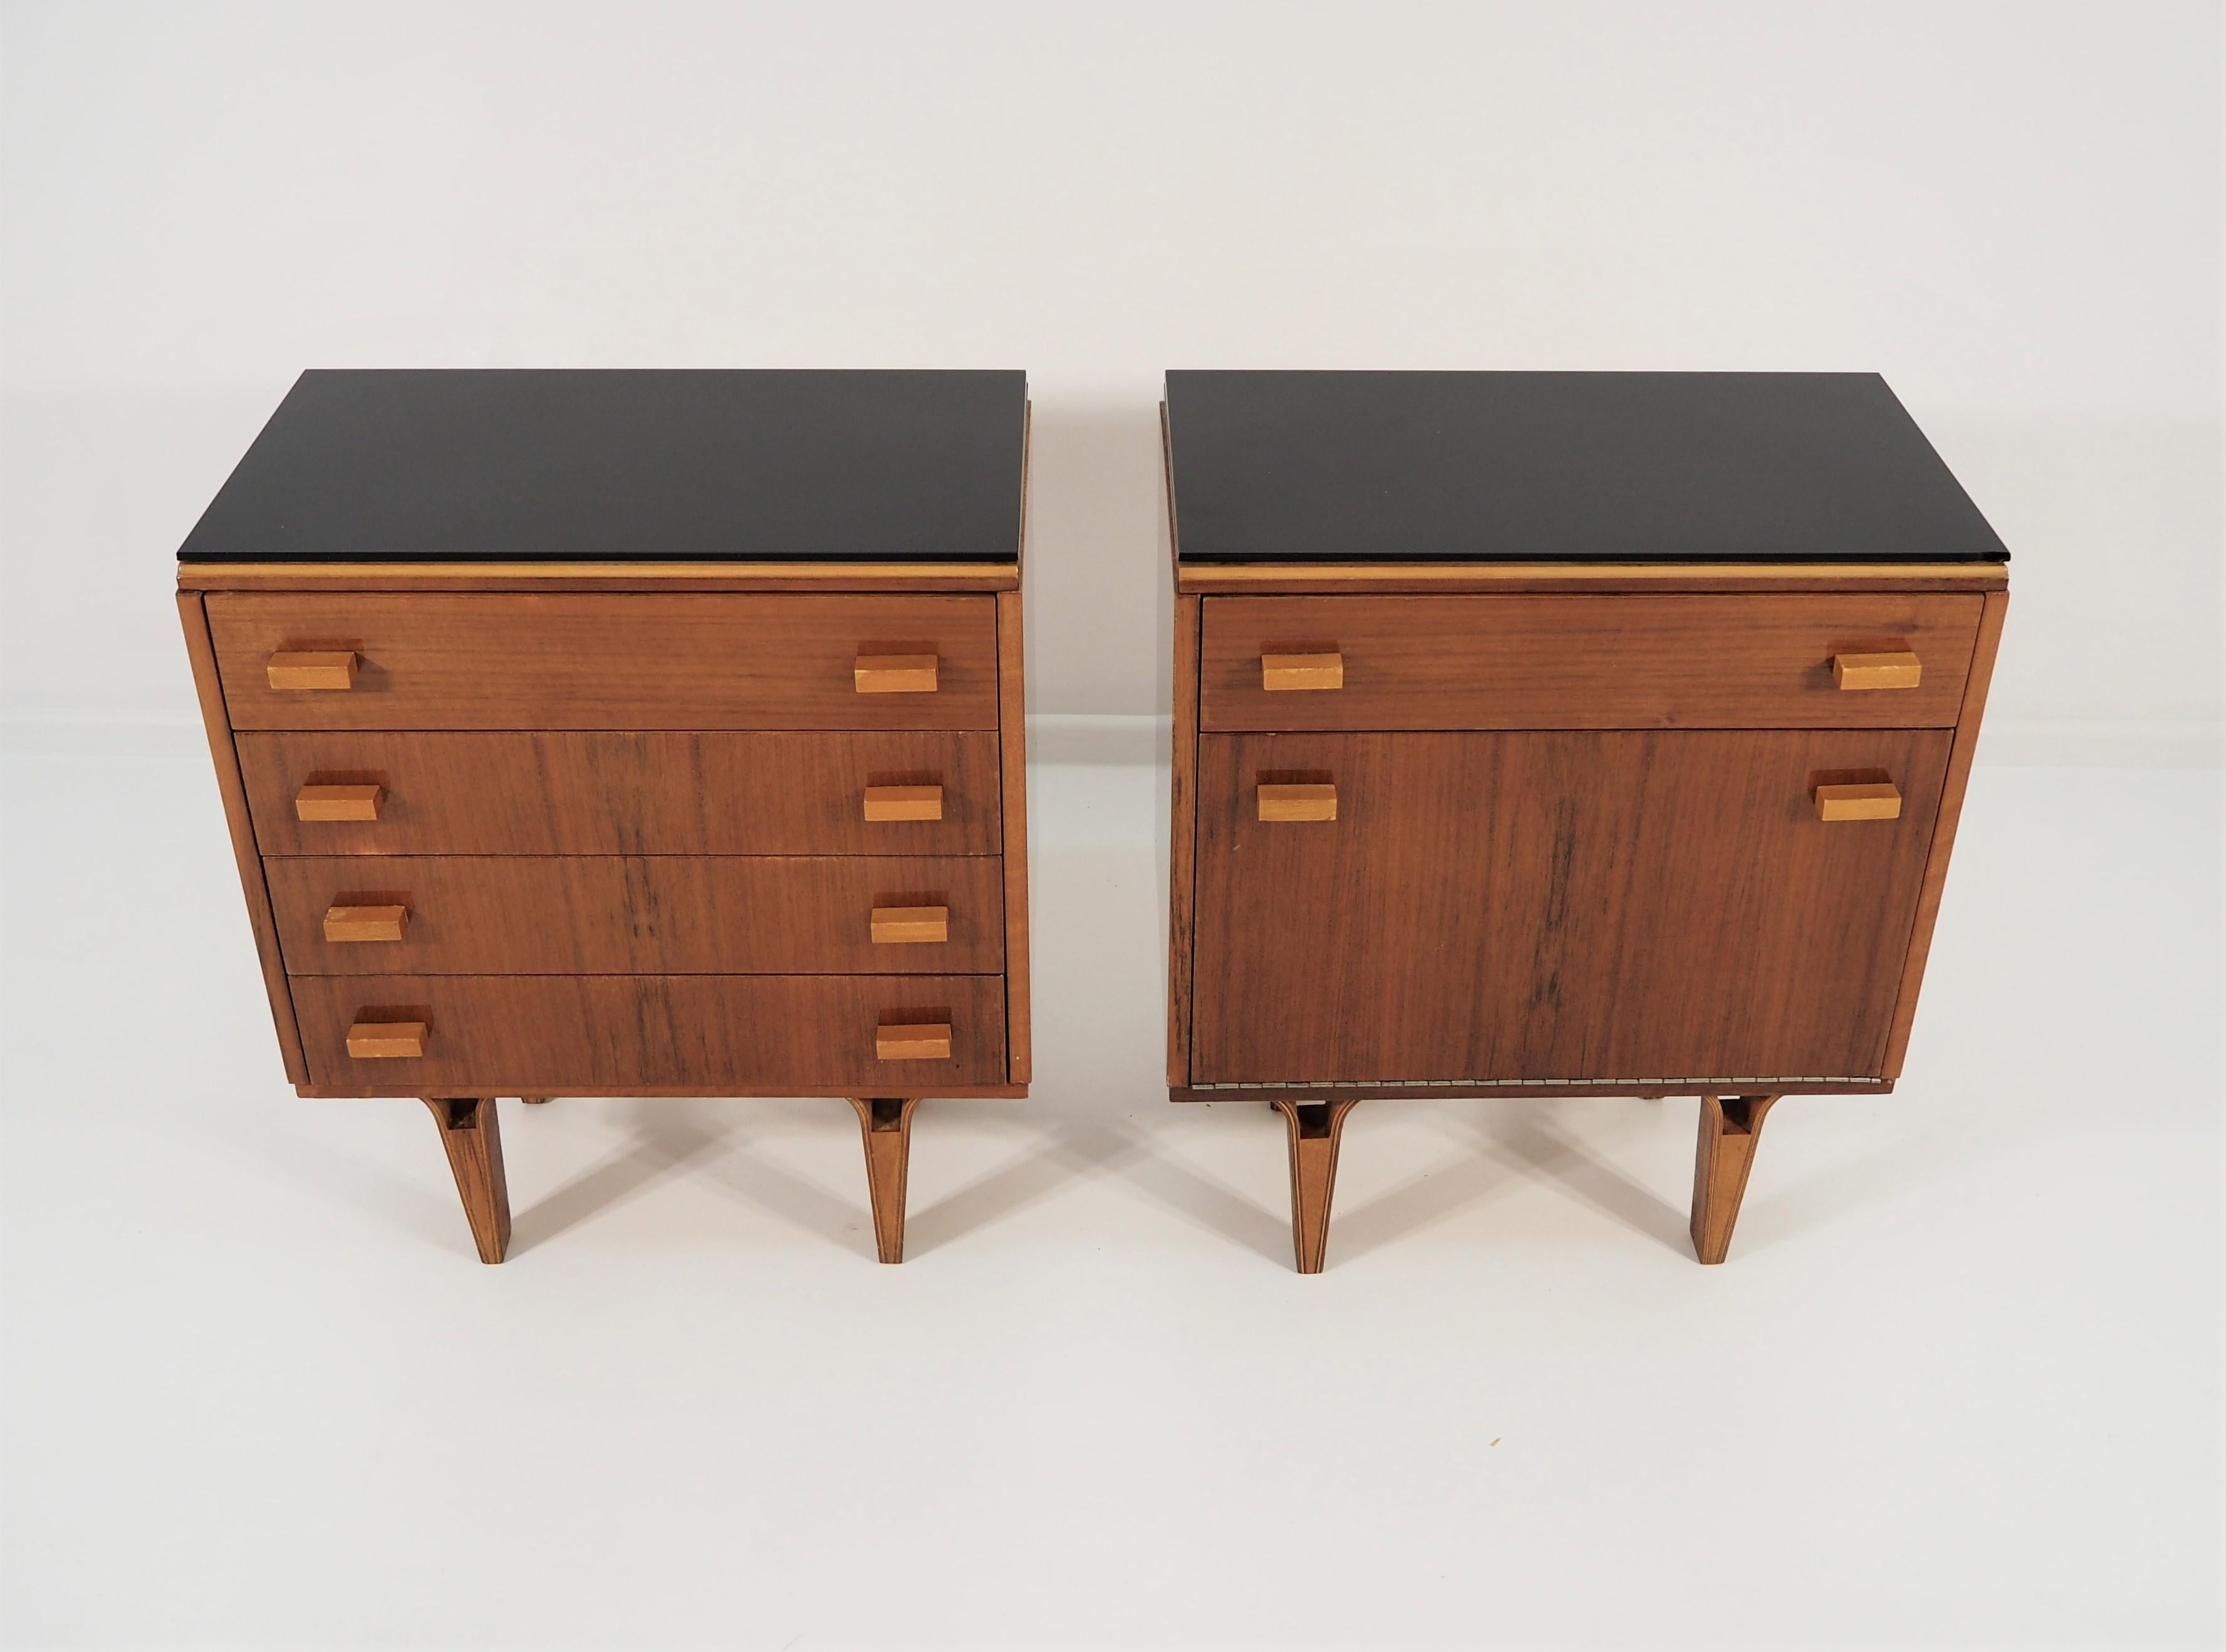 Vintage nightstands 1970s, set of 2. Walnut. Original condition. Scandinavian and Minimalist style is also perfect for modern interiors. Original condition with label.